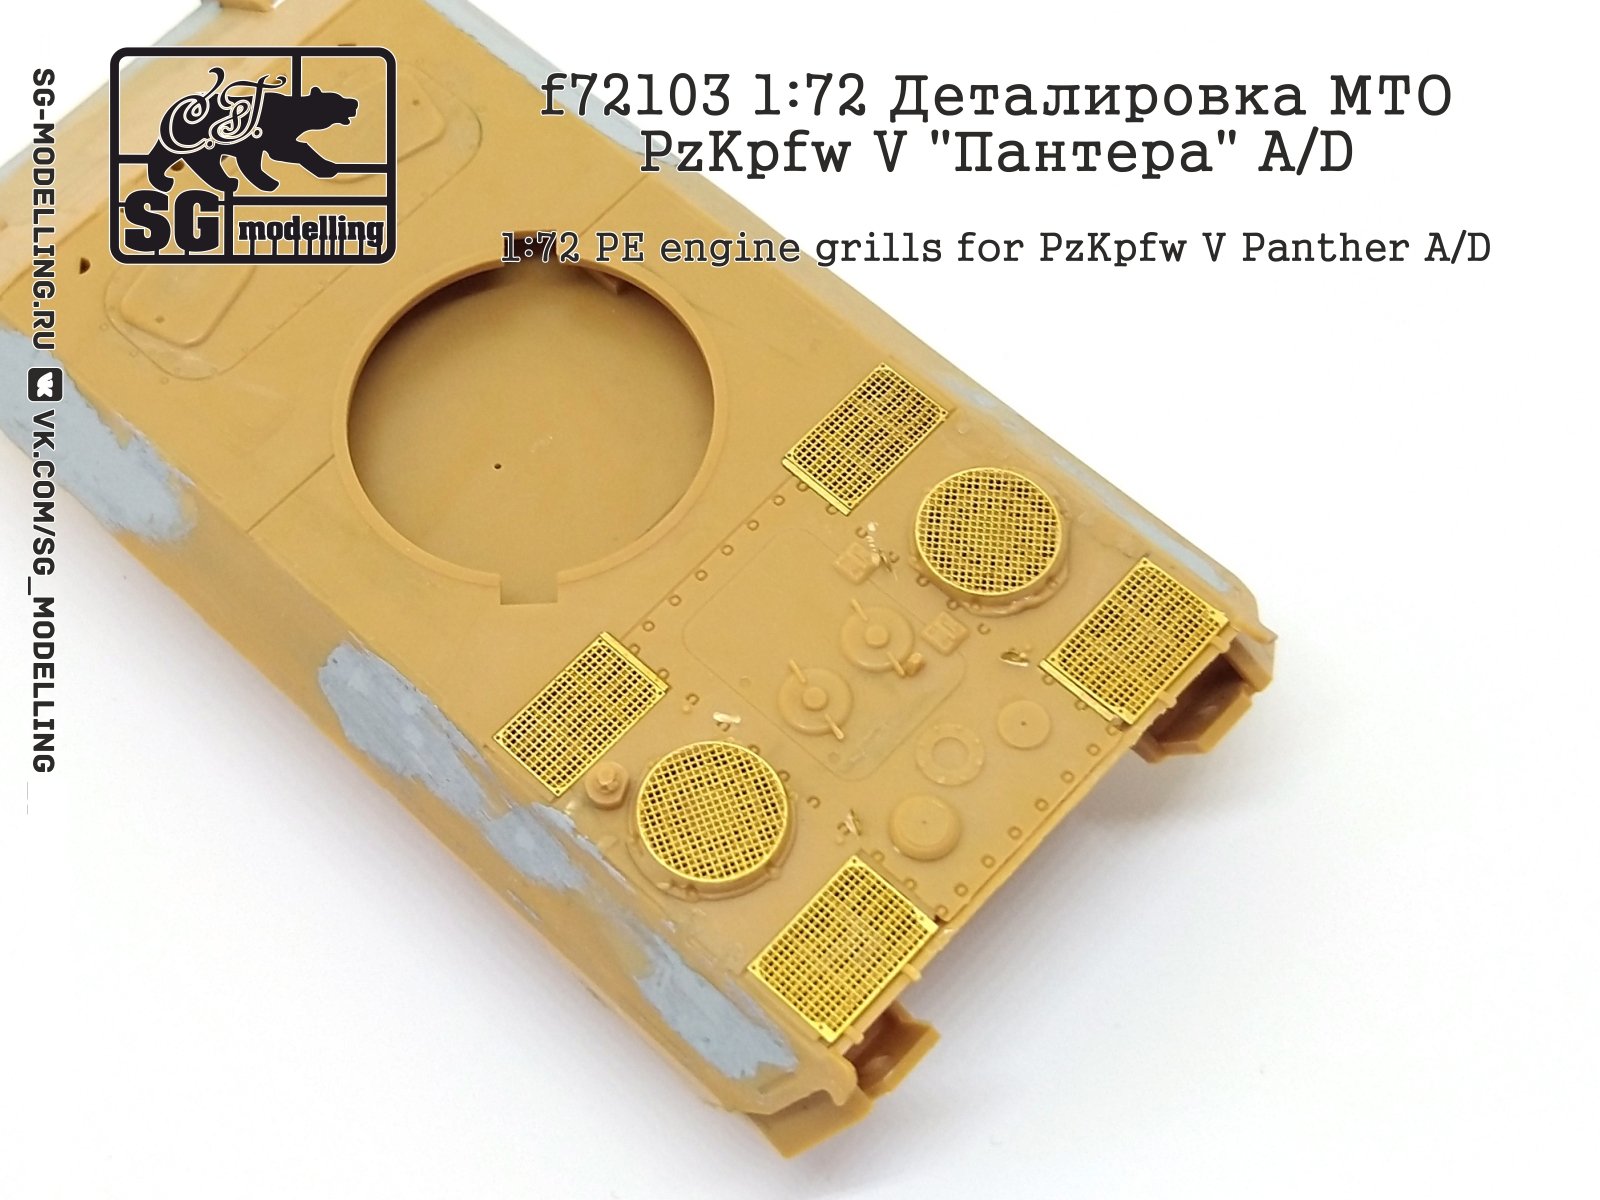 F72103 1:72 Detailing MTO PZKPFW V "Panther" A/D (FTD) - imodeller.store